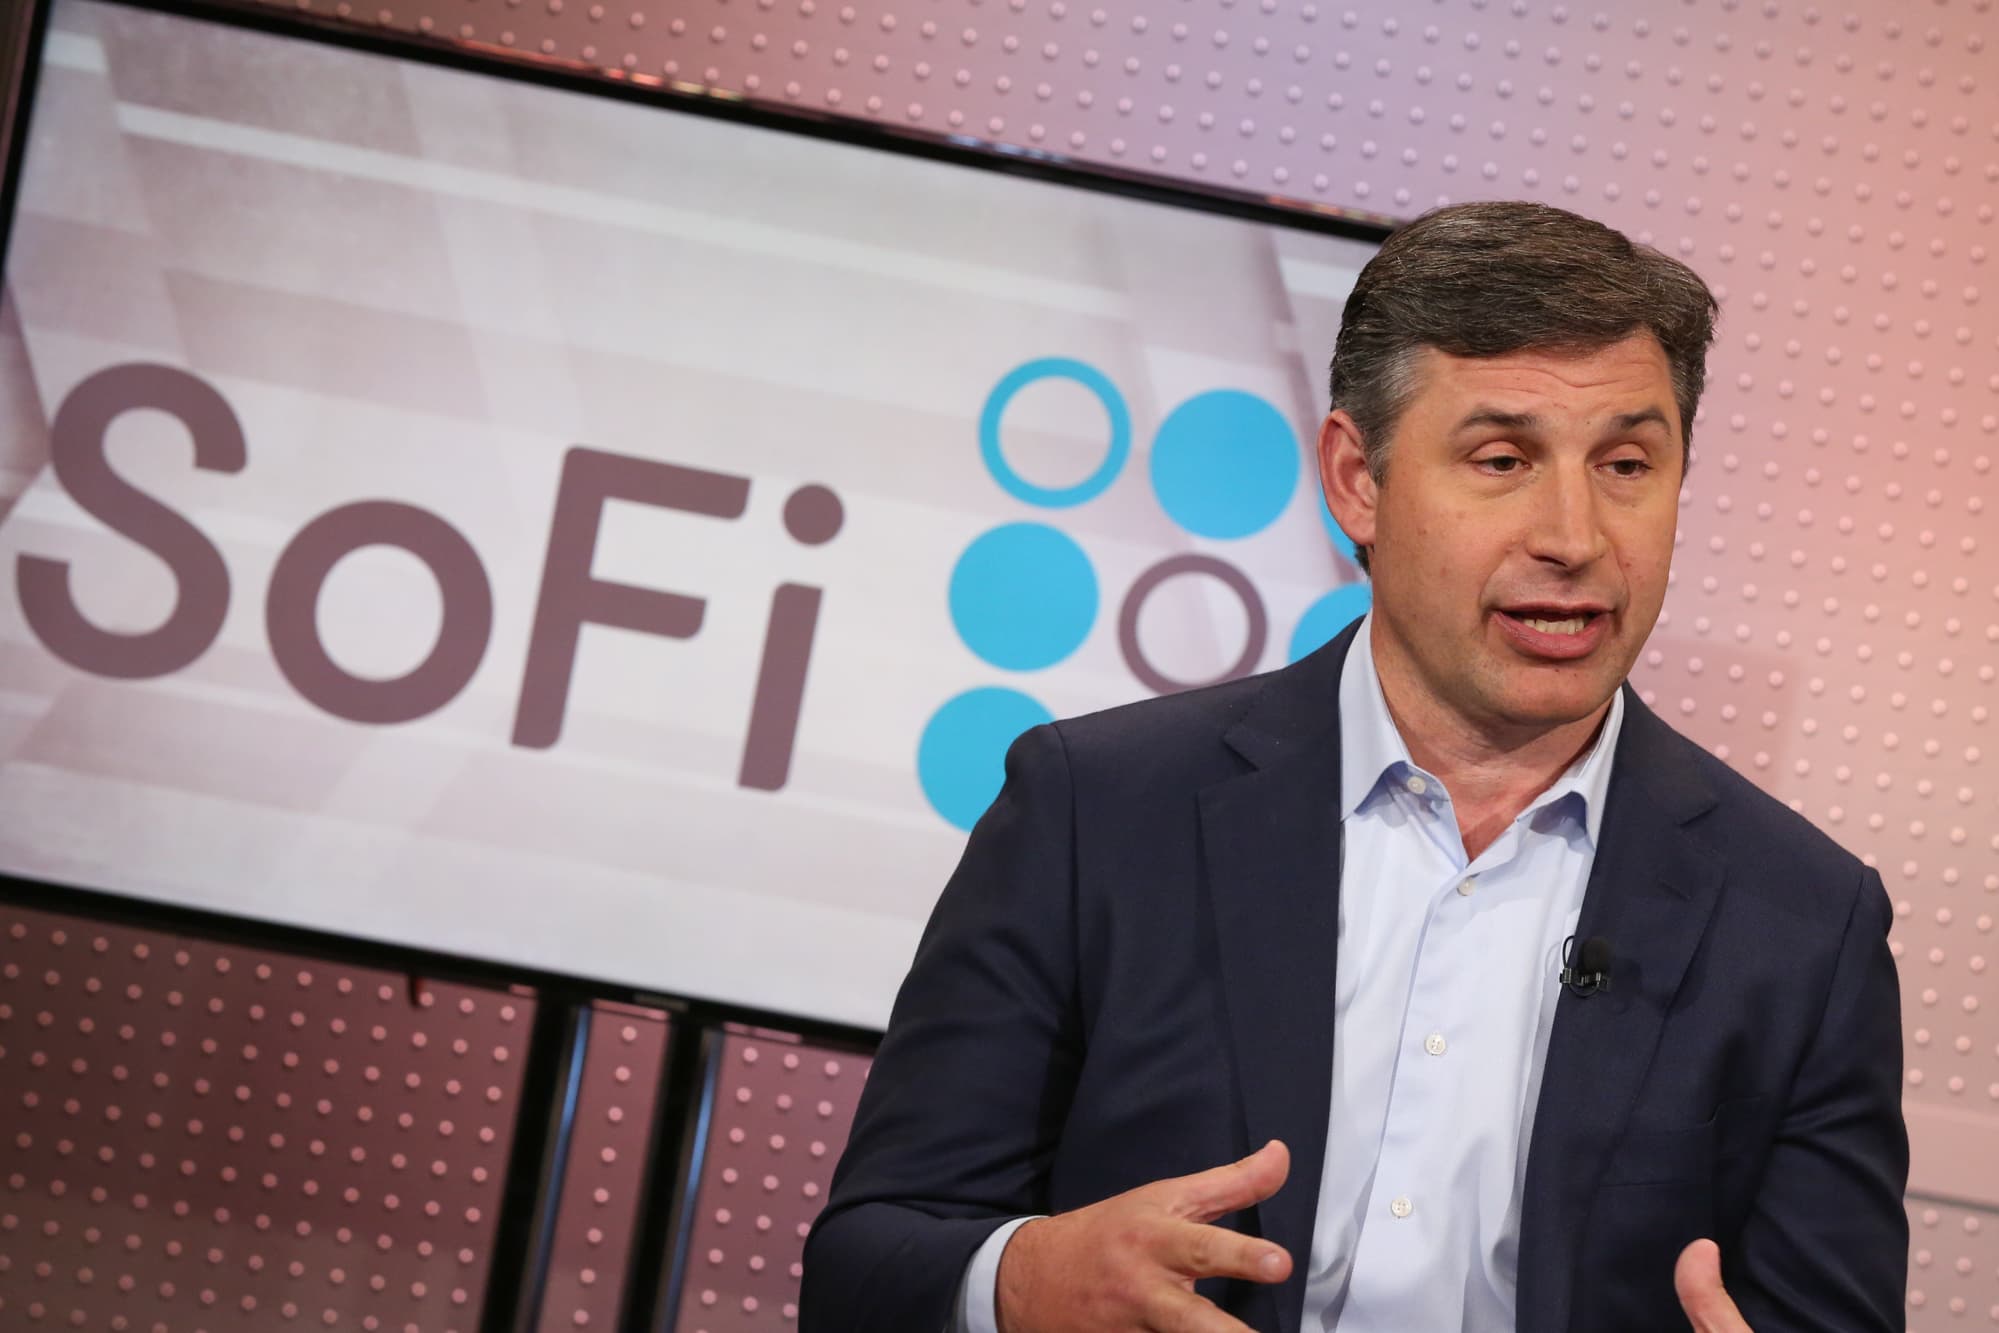 SoFi puts up a warning ‘you could lose all your money’ on every crypto trade, says CEO